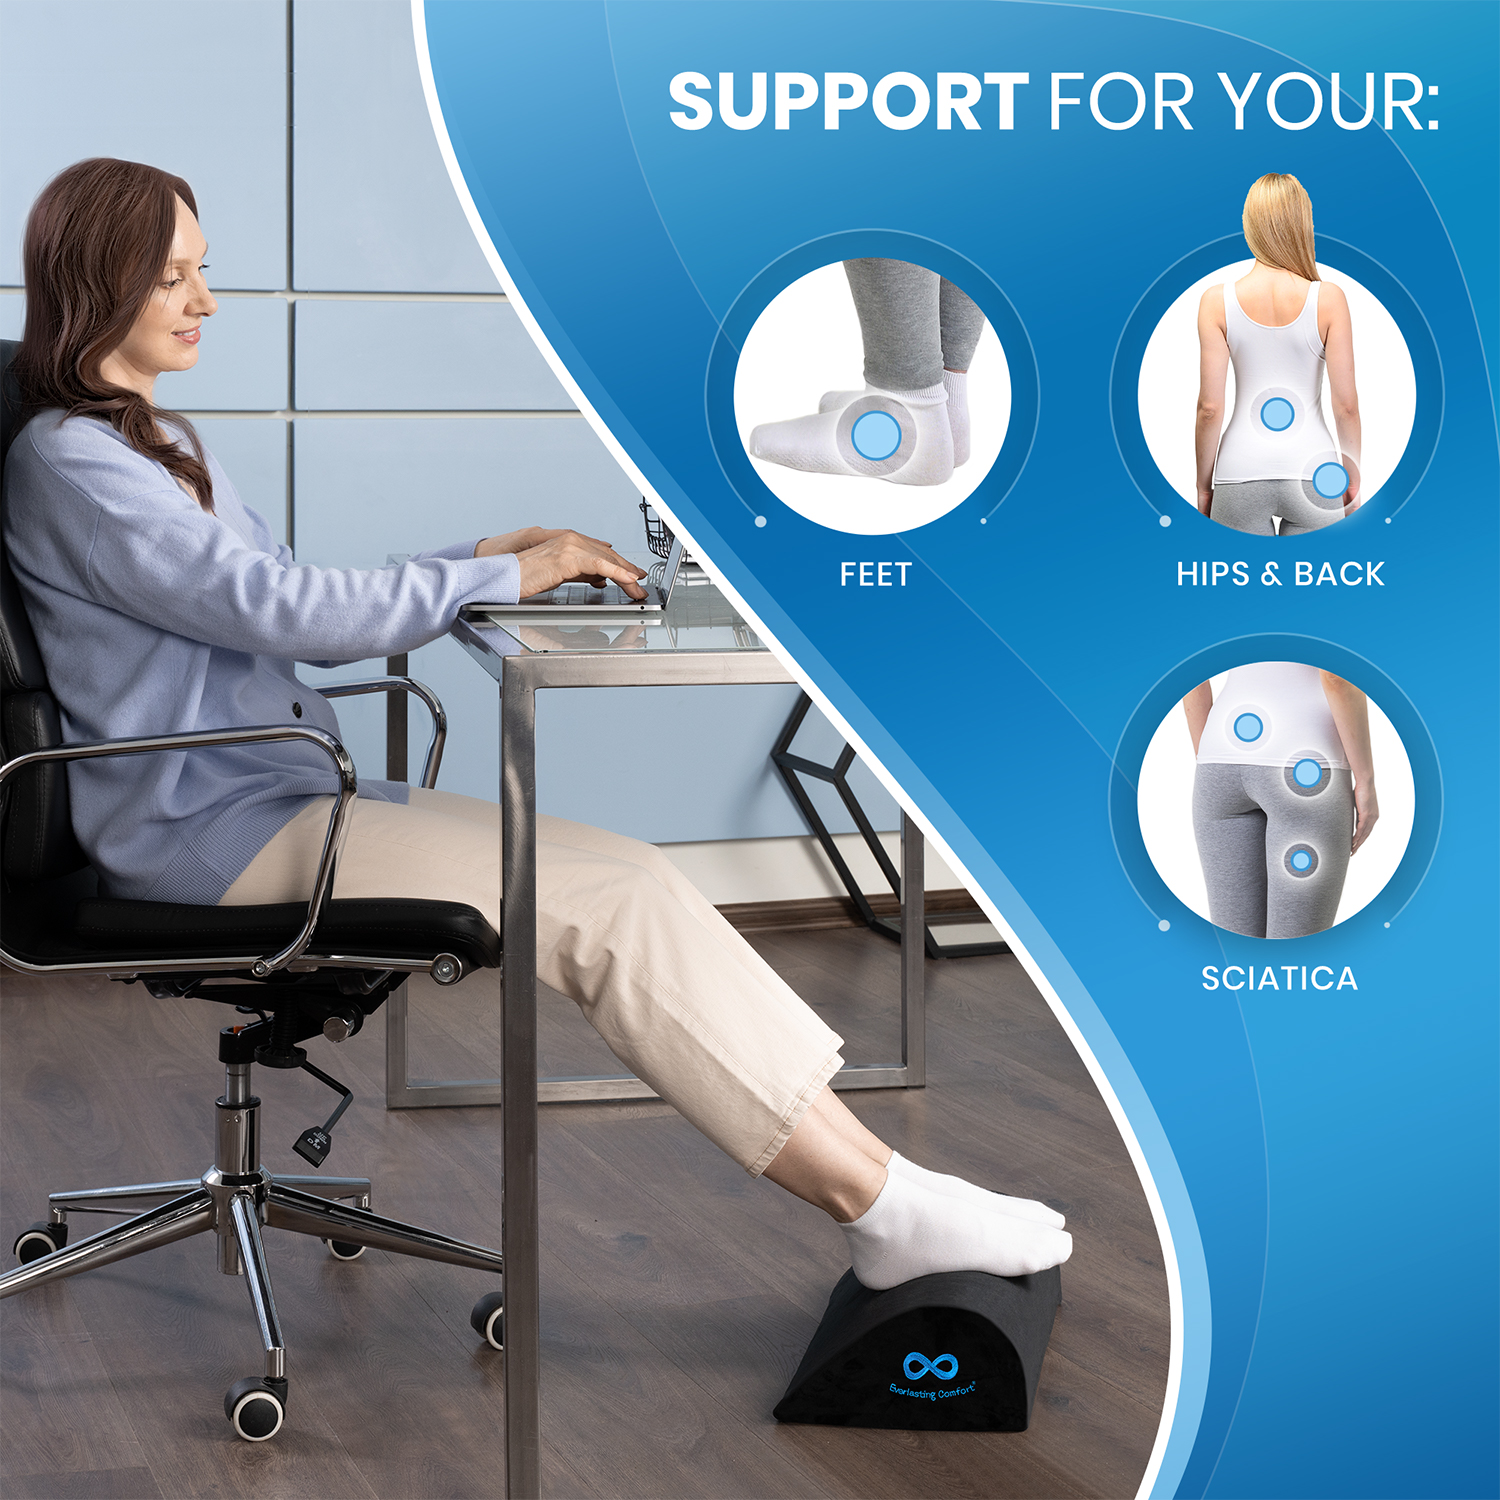 Everlasting Comfort Office Foot Rest for Under Desk, Footrest Leg Cushion Accessories, Ergonomic Cooling Gel Memory Foam Foot Stool Pillow for Work, Gaming, Computer, Office Cubicle and Home (Black) - image 3 of 7